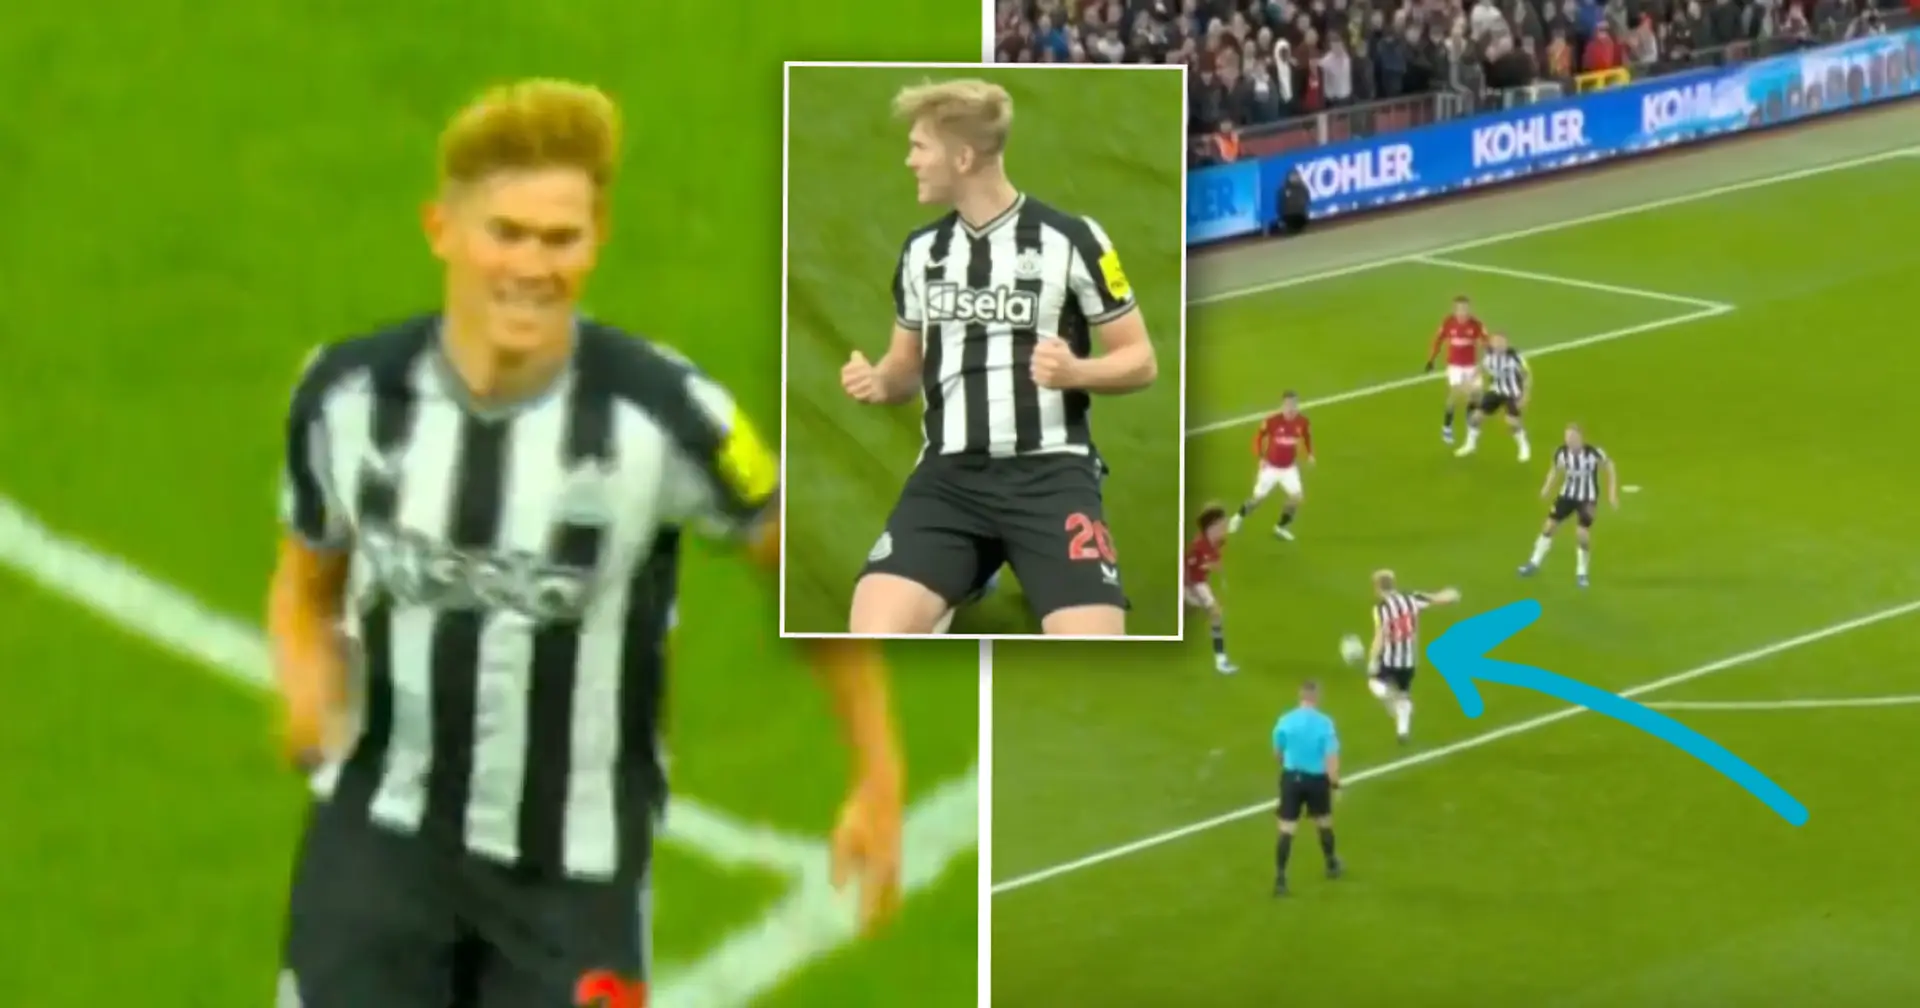 Spotted: Chelsea Lewis loanee Hall scores screamer against Man United in first official goal